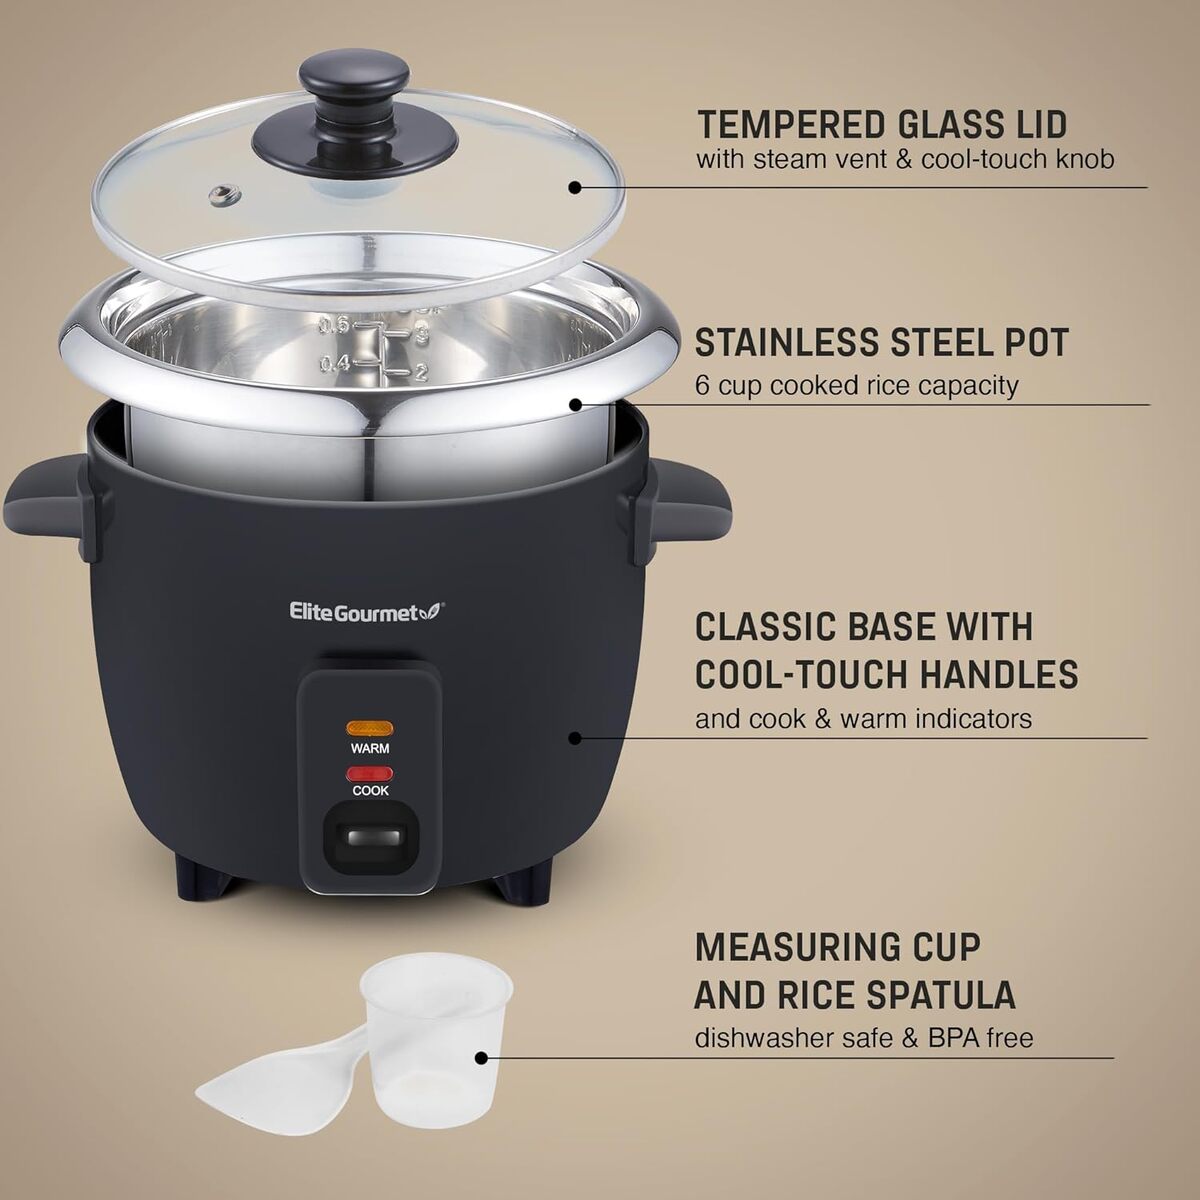 Elite Gourmet 6 Cup Rice Cooker in Stainless Steel Pot